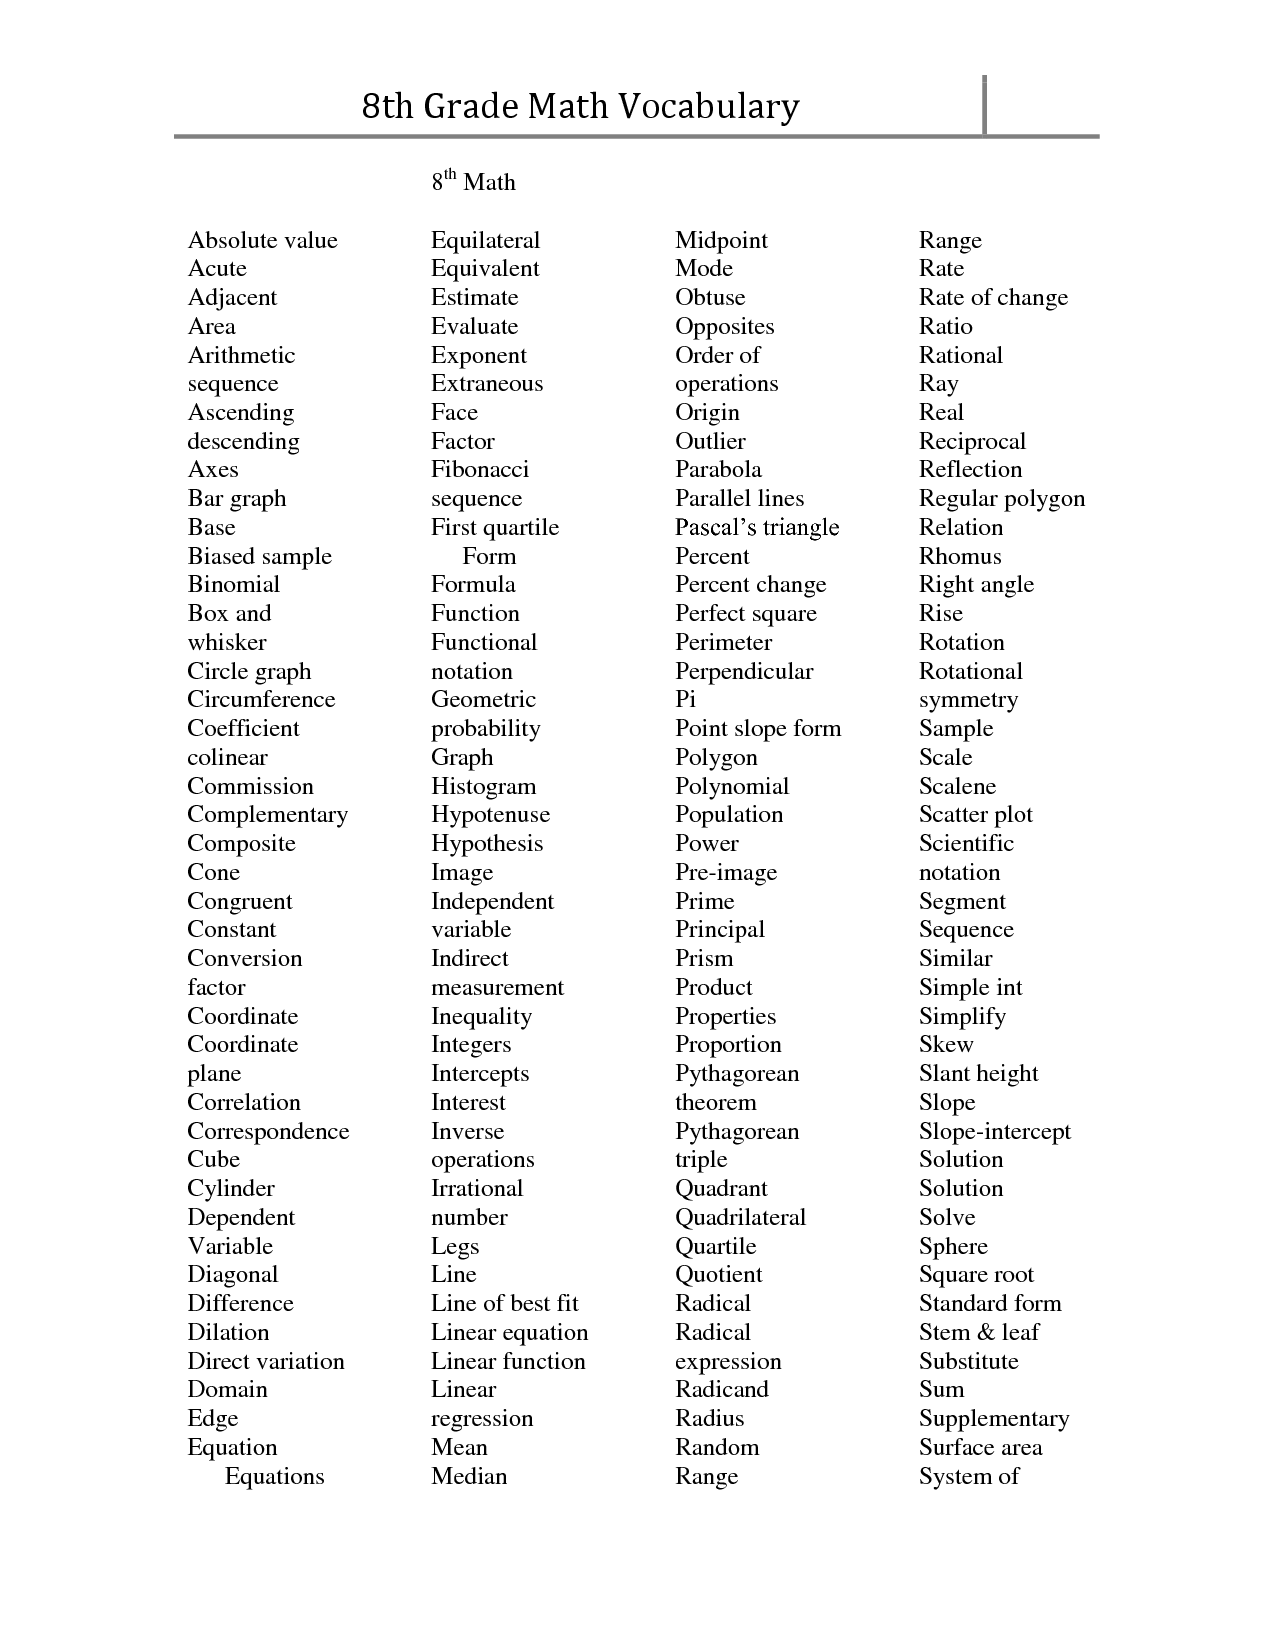 14-science-vocabulary-word-worksheets-worksheeto